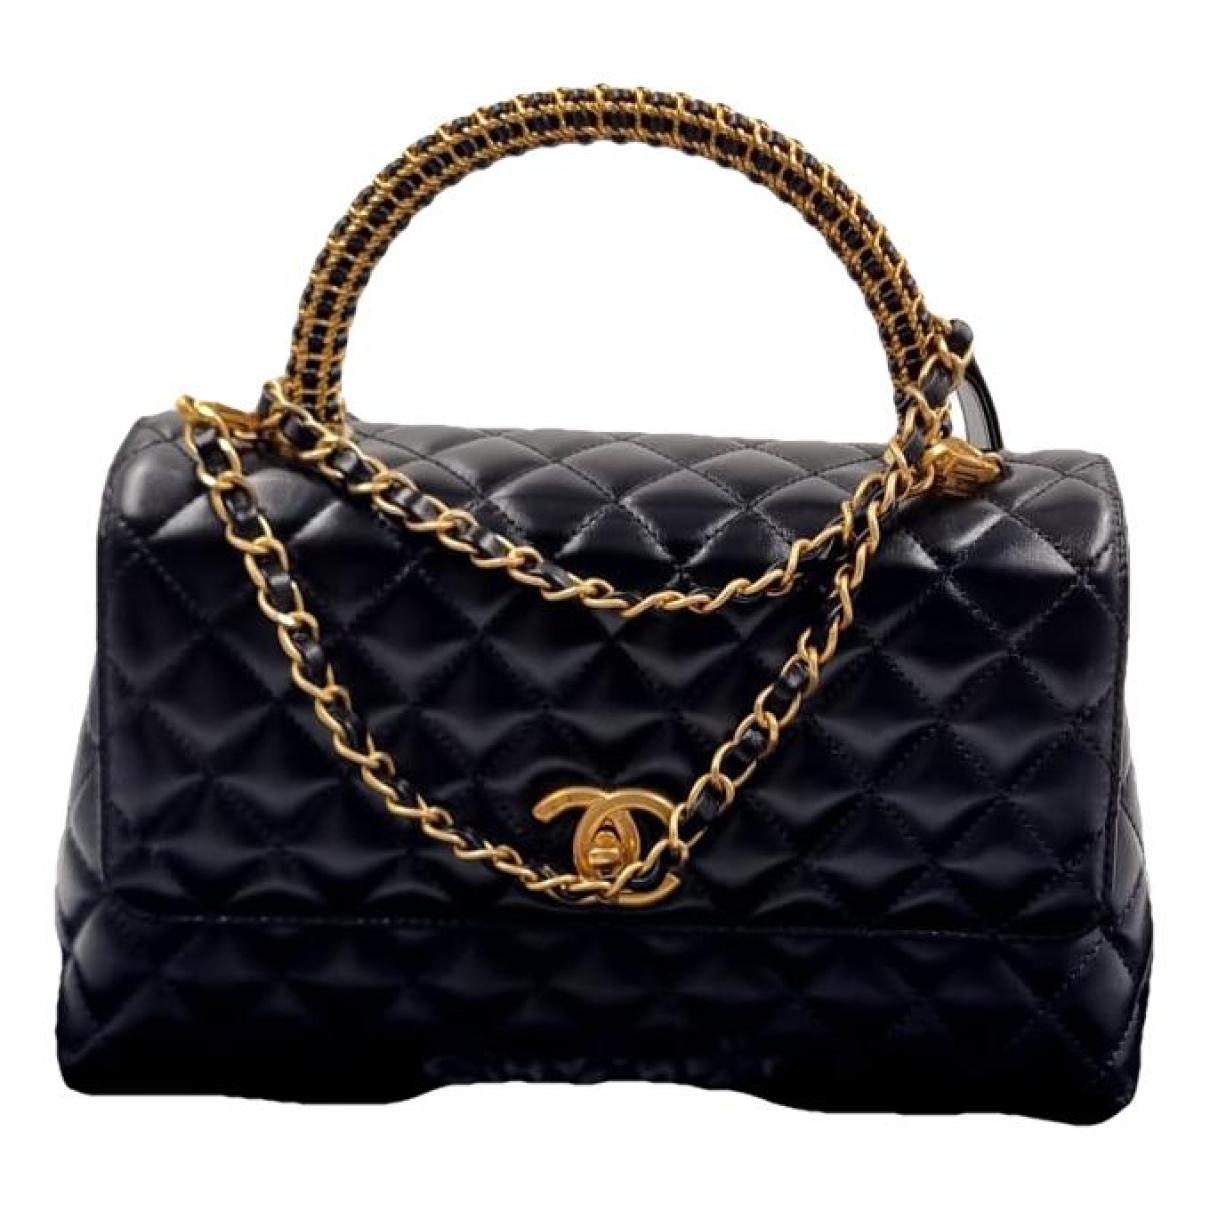 Pre-owned Chanel Coco Handle Leather Handbag In Black